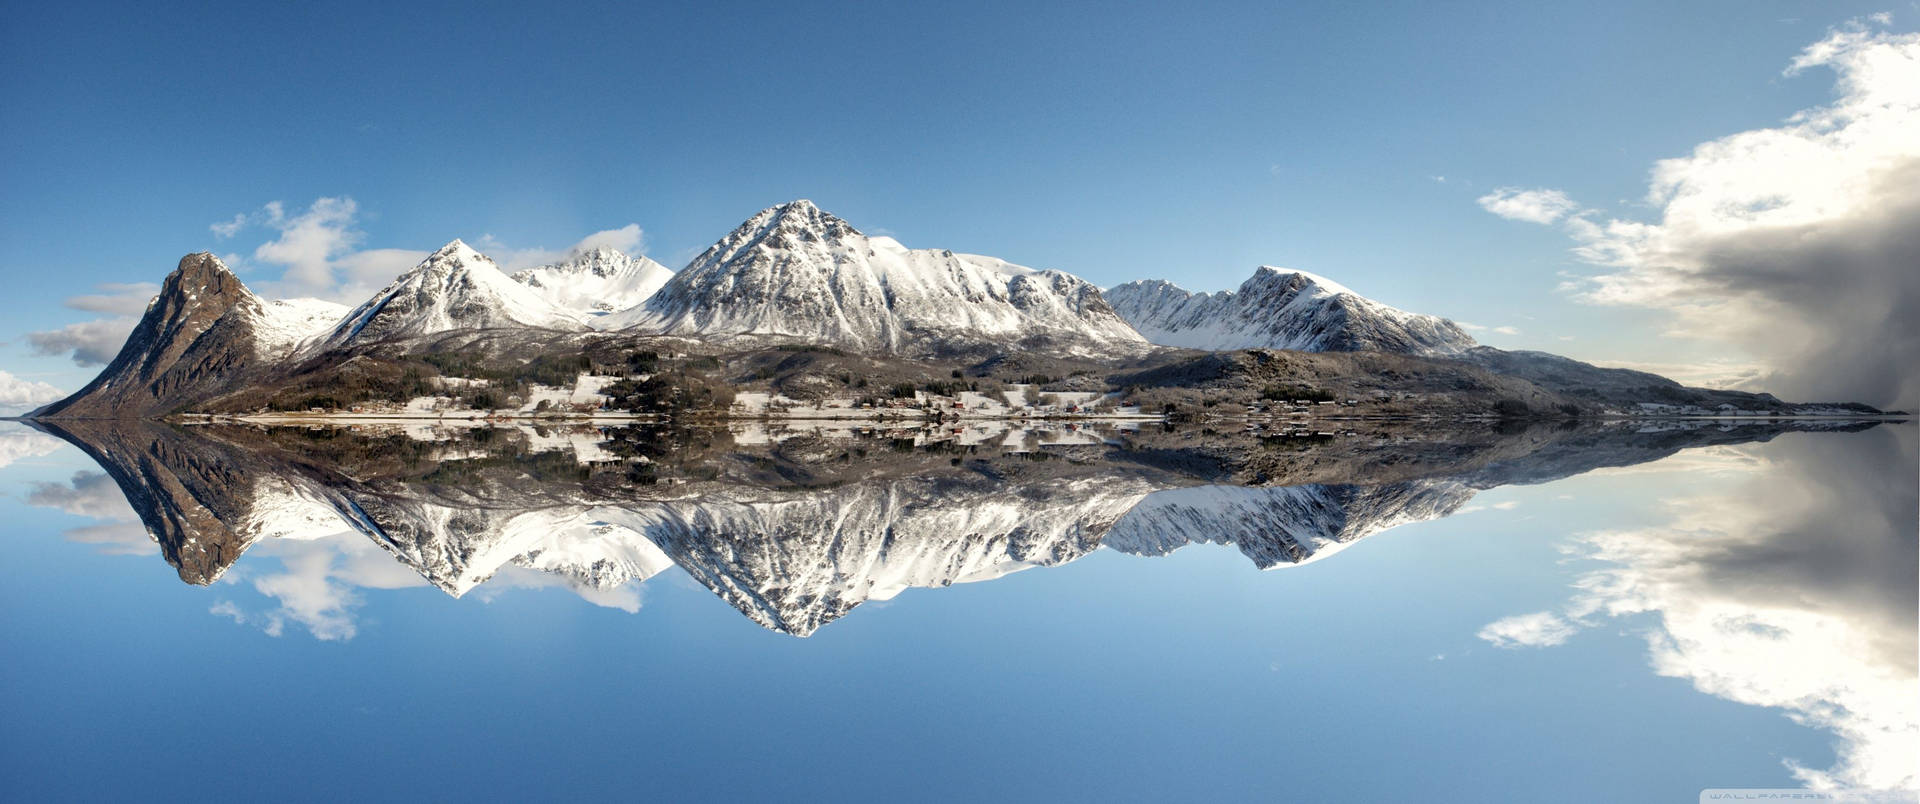 Ultrawide Snowy Mountain Reflection Background